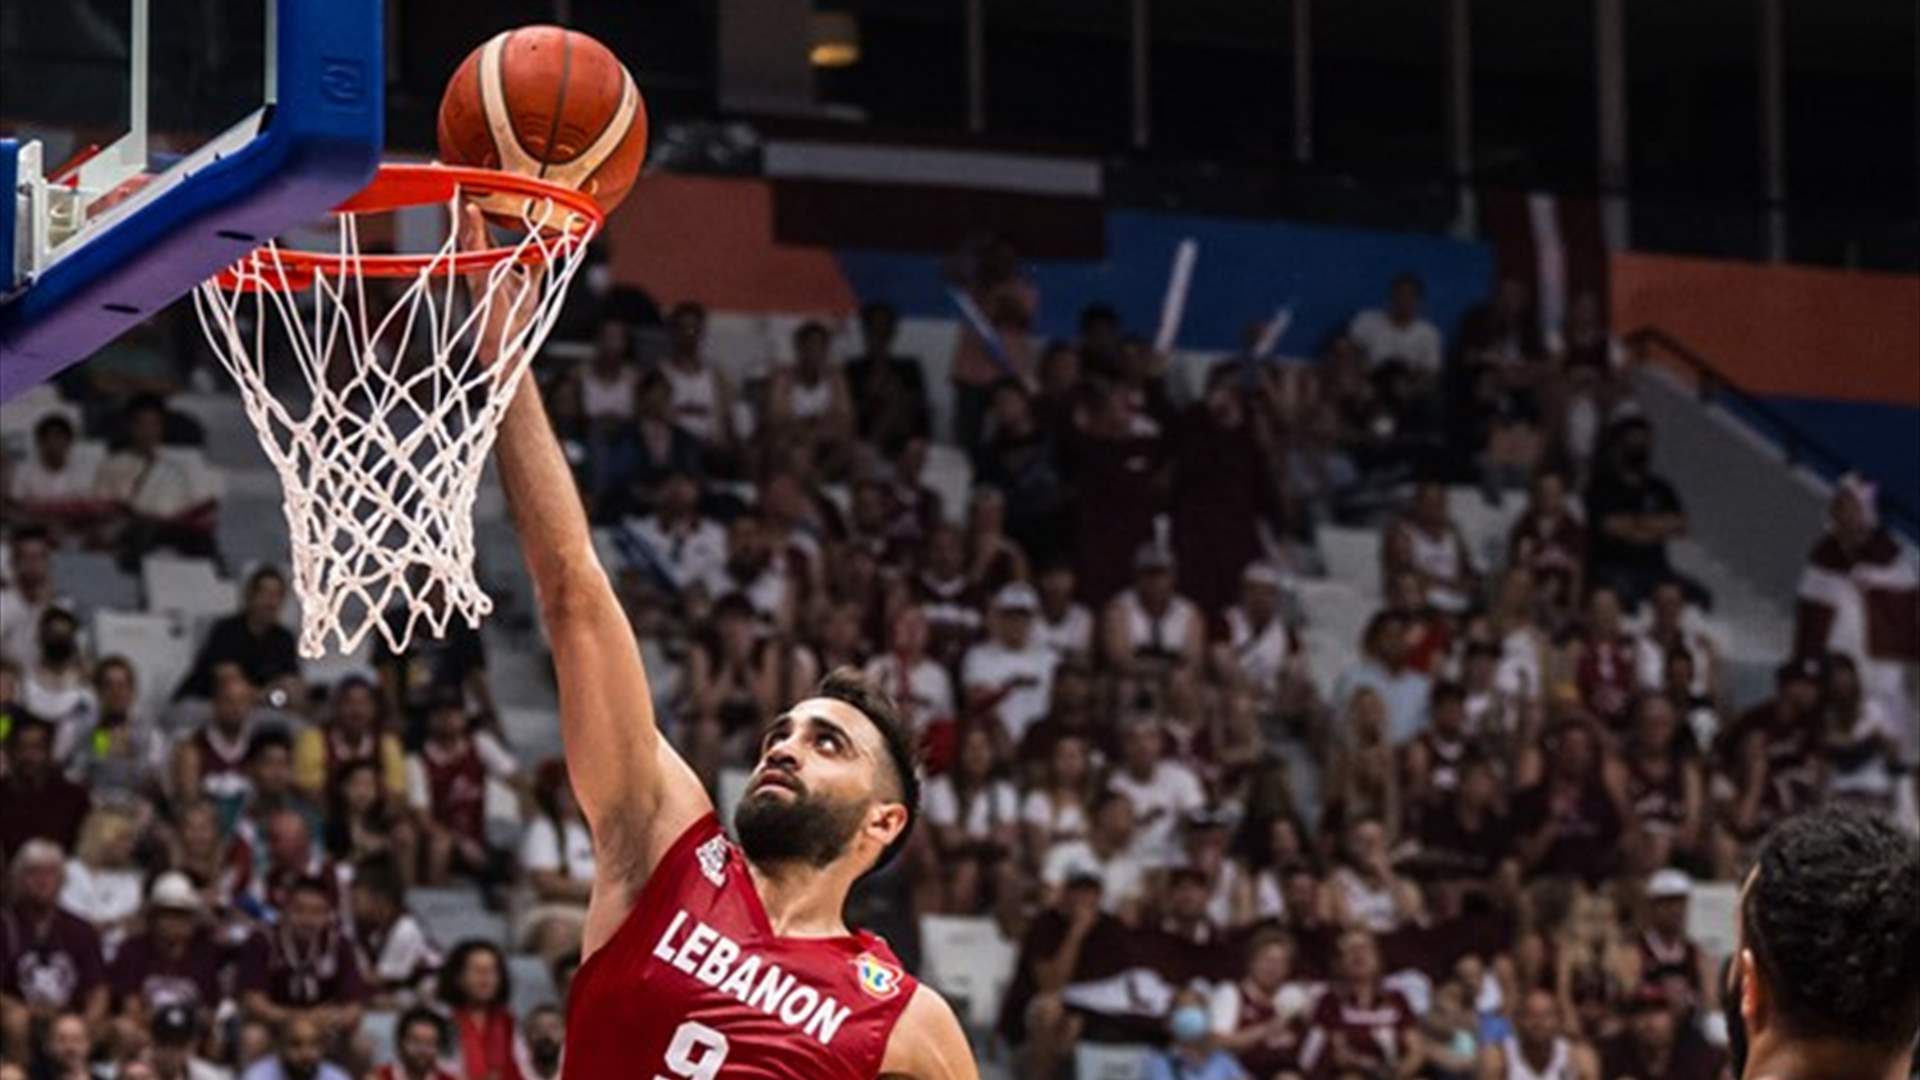 Lebanons Late Rally Not Enough Against Latvia in FIBA Basketball World Cup Opener